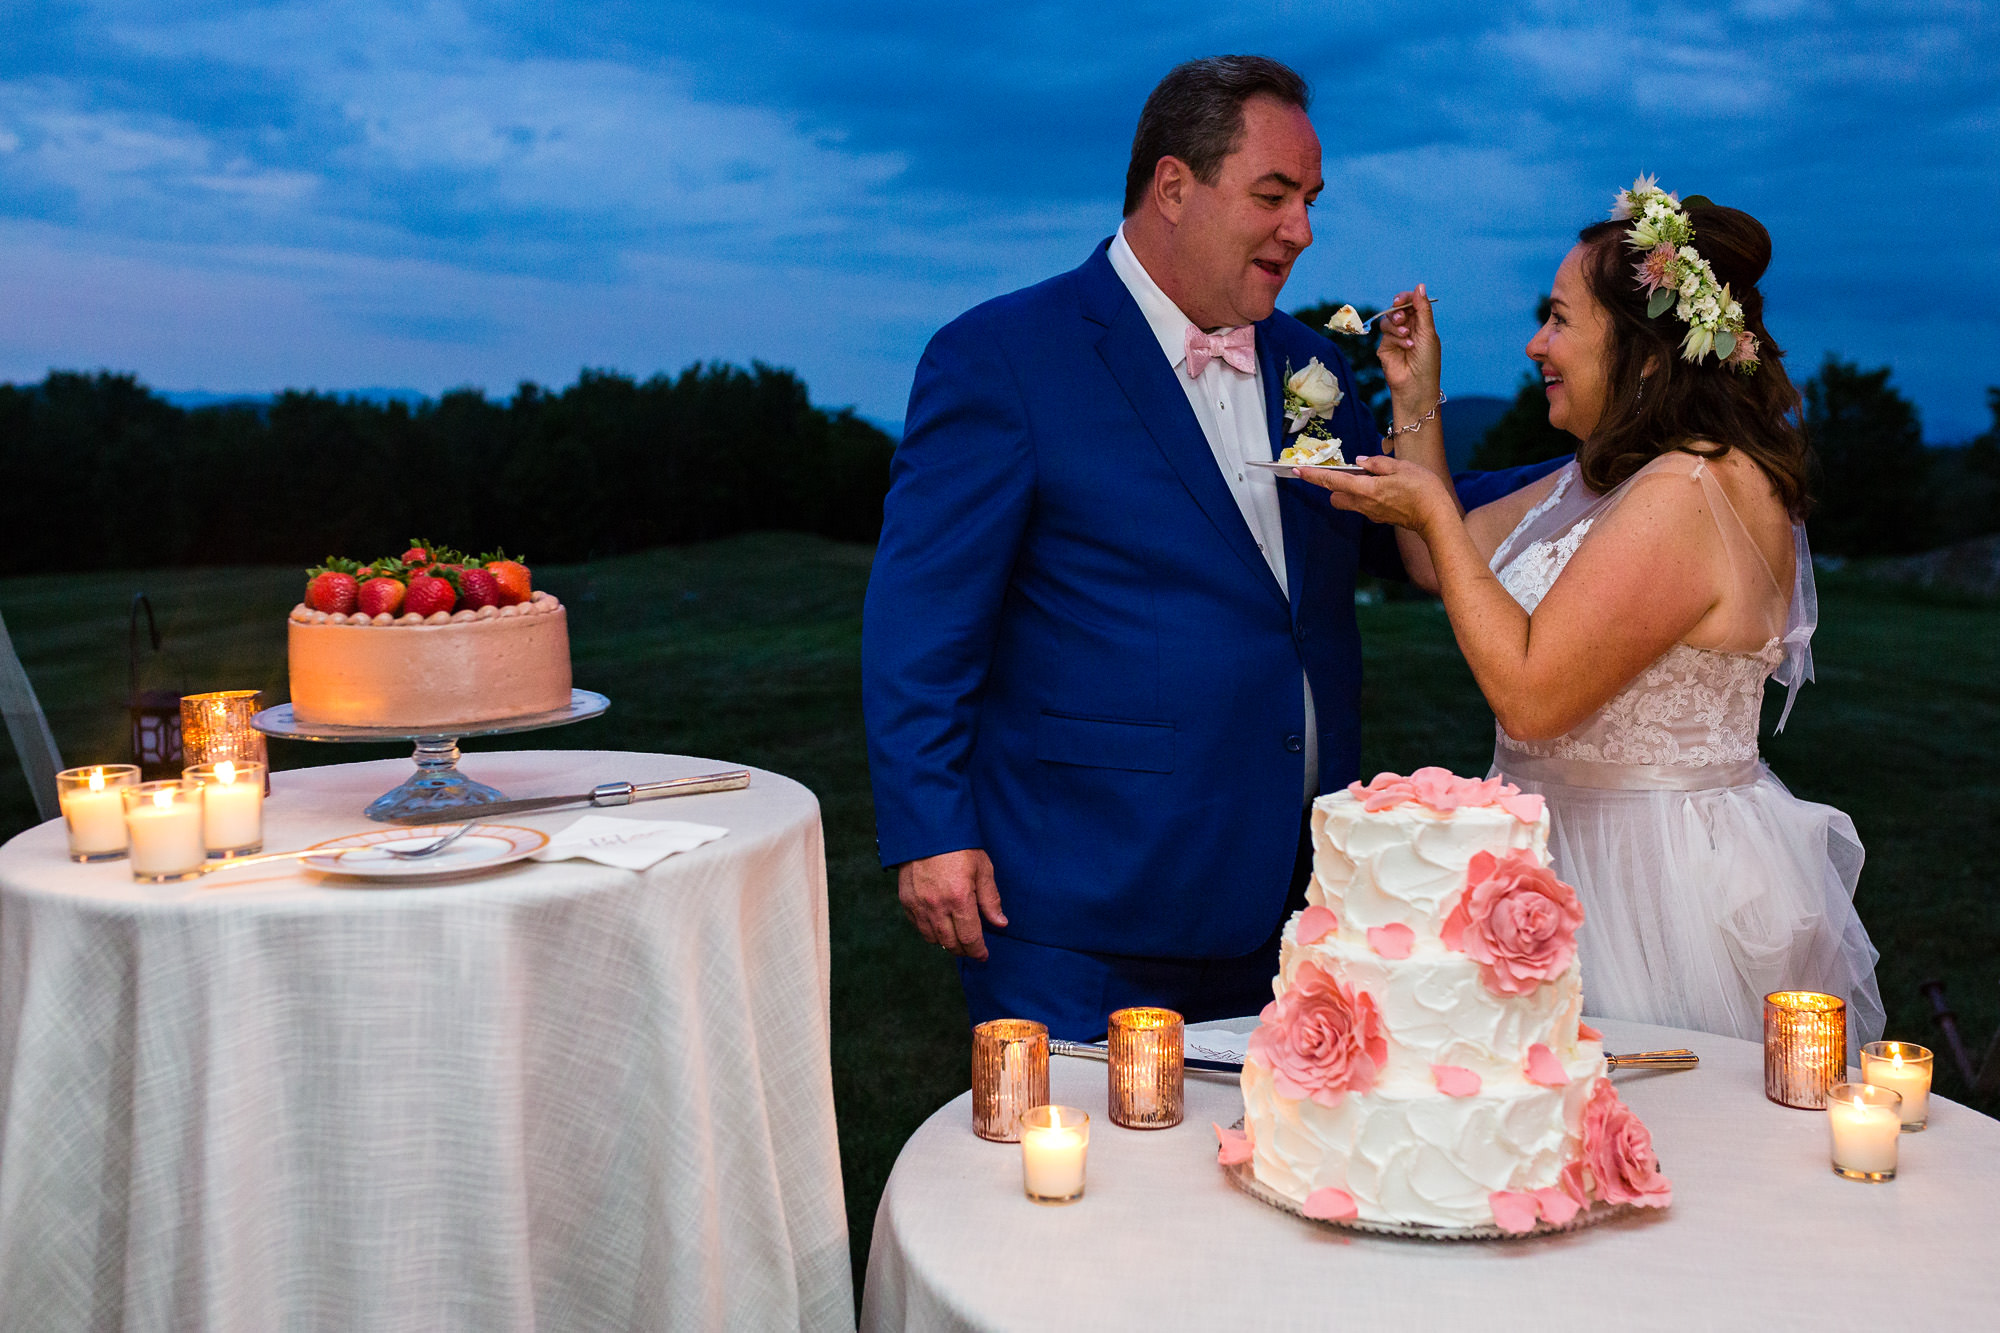 The bride and groom cut the wedding cake at twilight